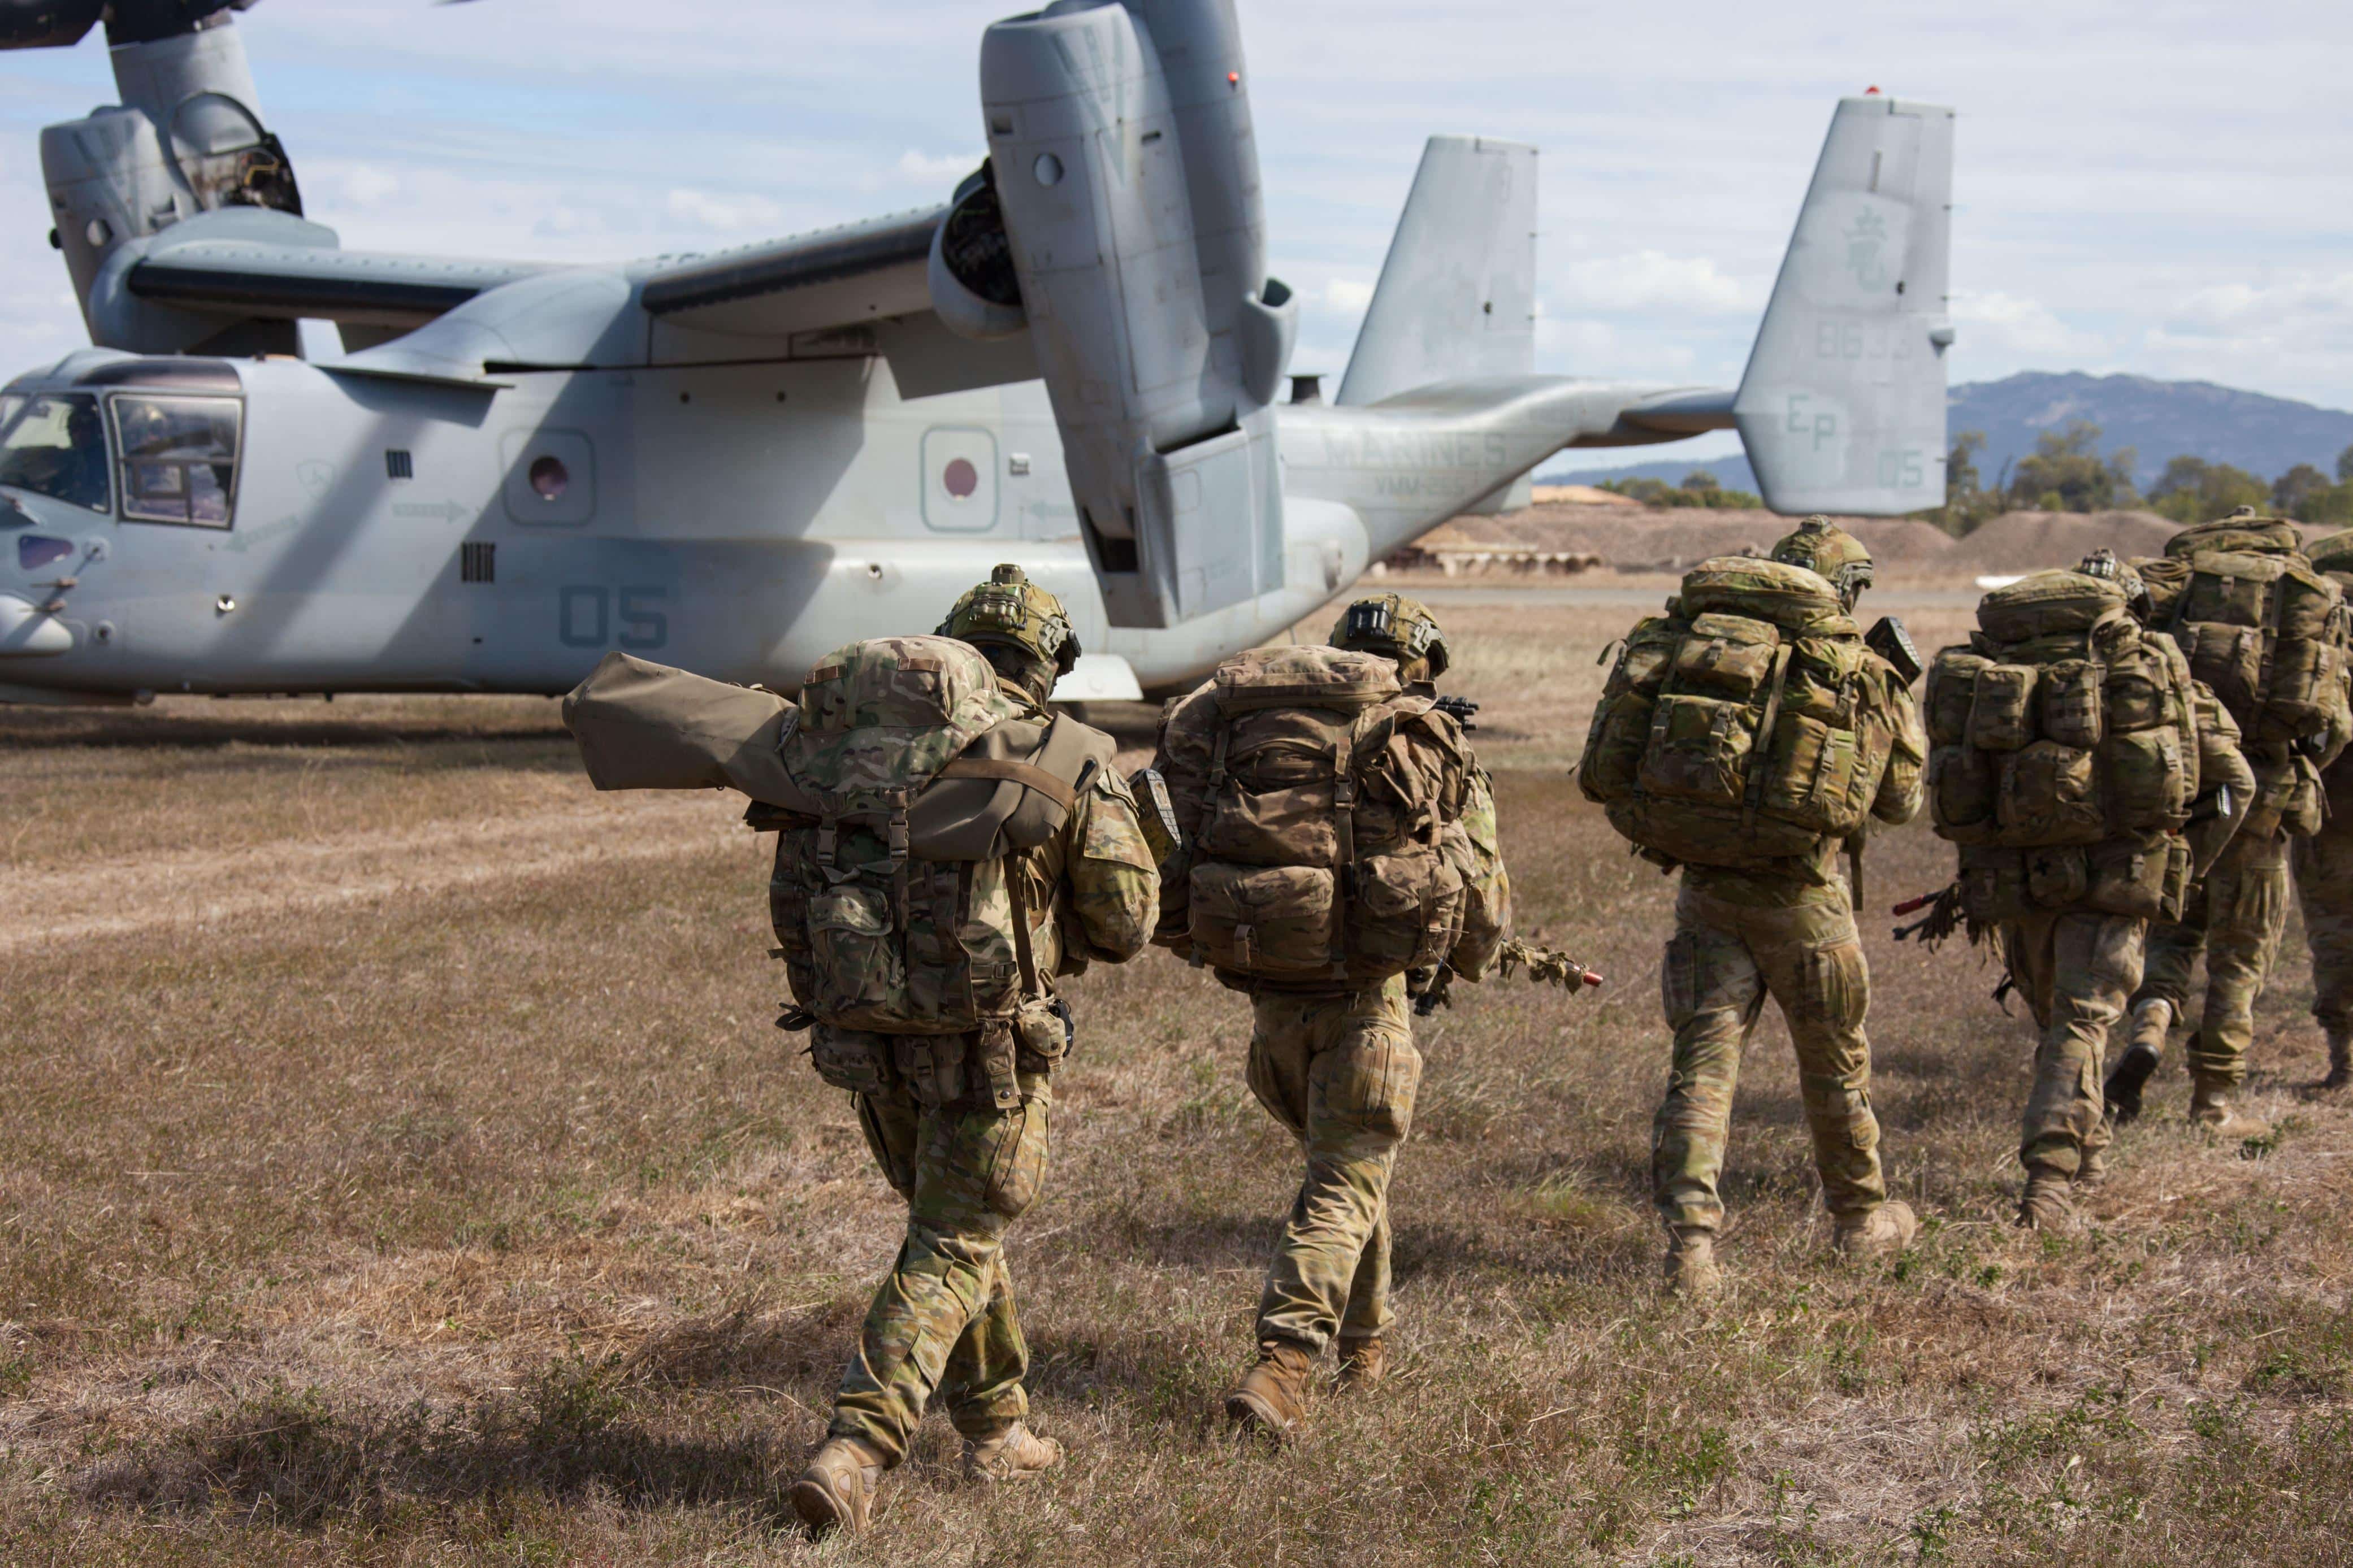 A group of Australian Soldiers prepare to fly in an MV-22B Osprey tiltrotor aircraft with Marine Medium Tiltrotor Squadron 265 (Reinforced), 31st Marine Expeditionary Unit in Bowen, Queensland, Australia, July 23, 2019. The 31st MEU and USS Wasp (LHD 1) Amphibious Ready Group are currently participating in Exercise Talisman Sabre 2019